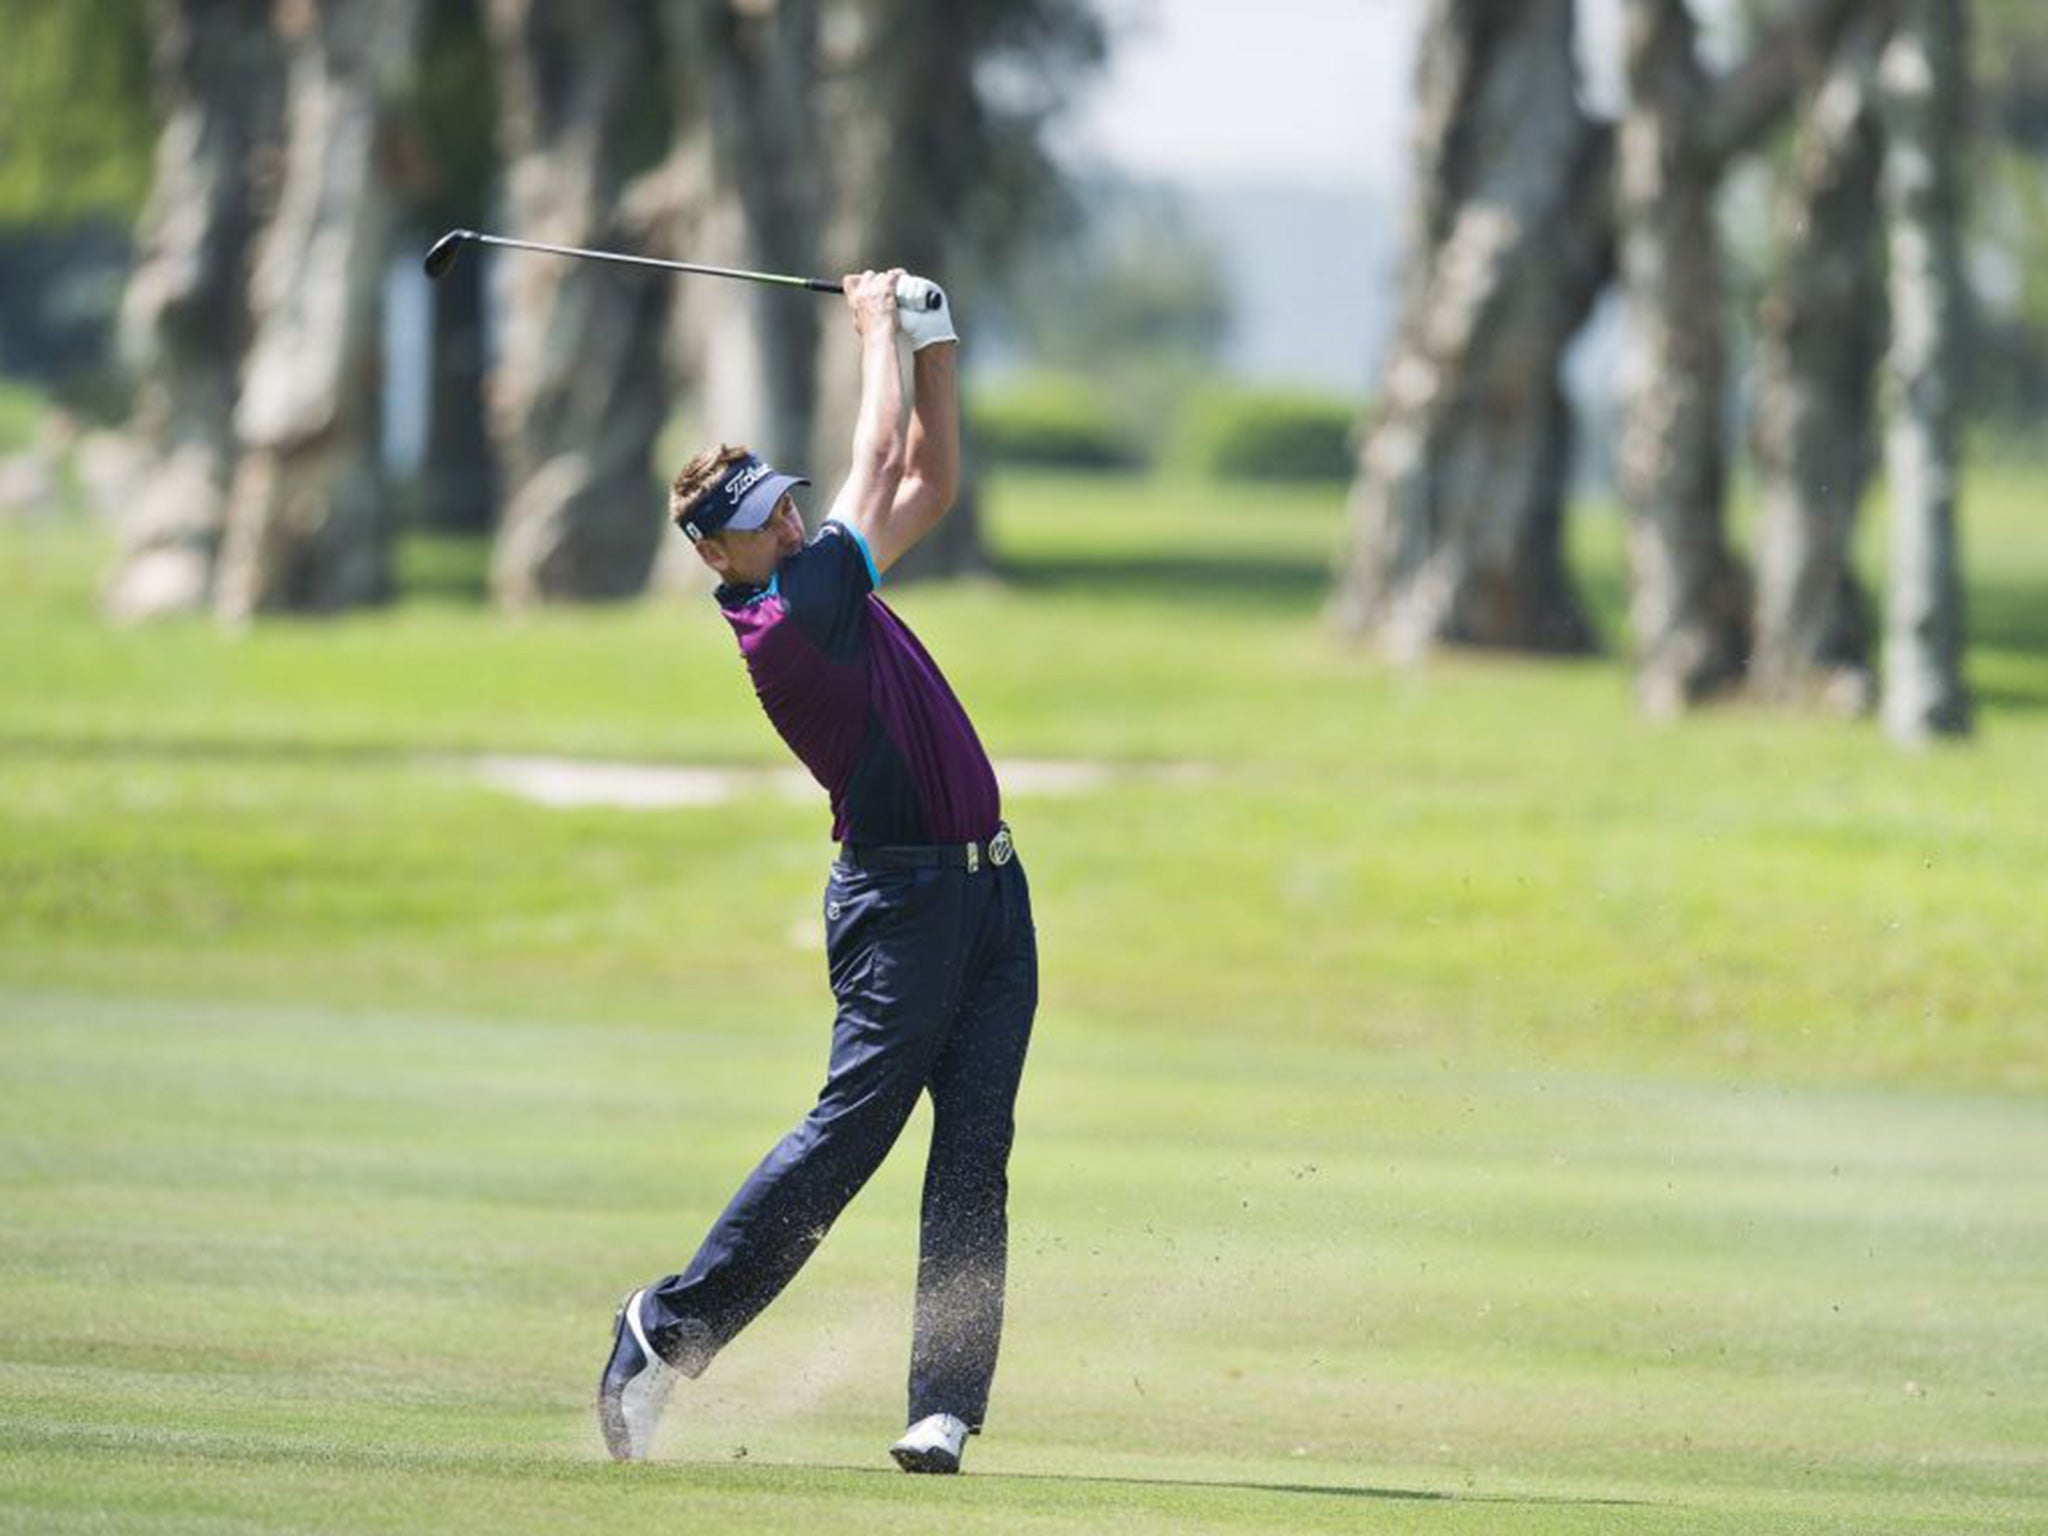 Ian Poulter plays a shot on the 6th hole during the second round of the UBS Hong Kong Open